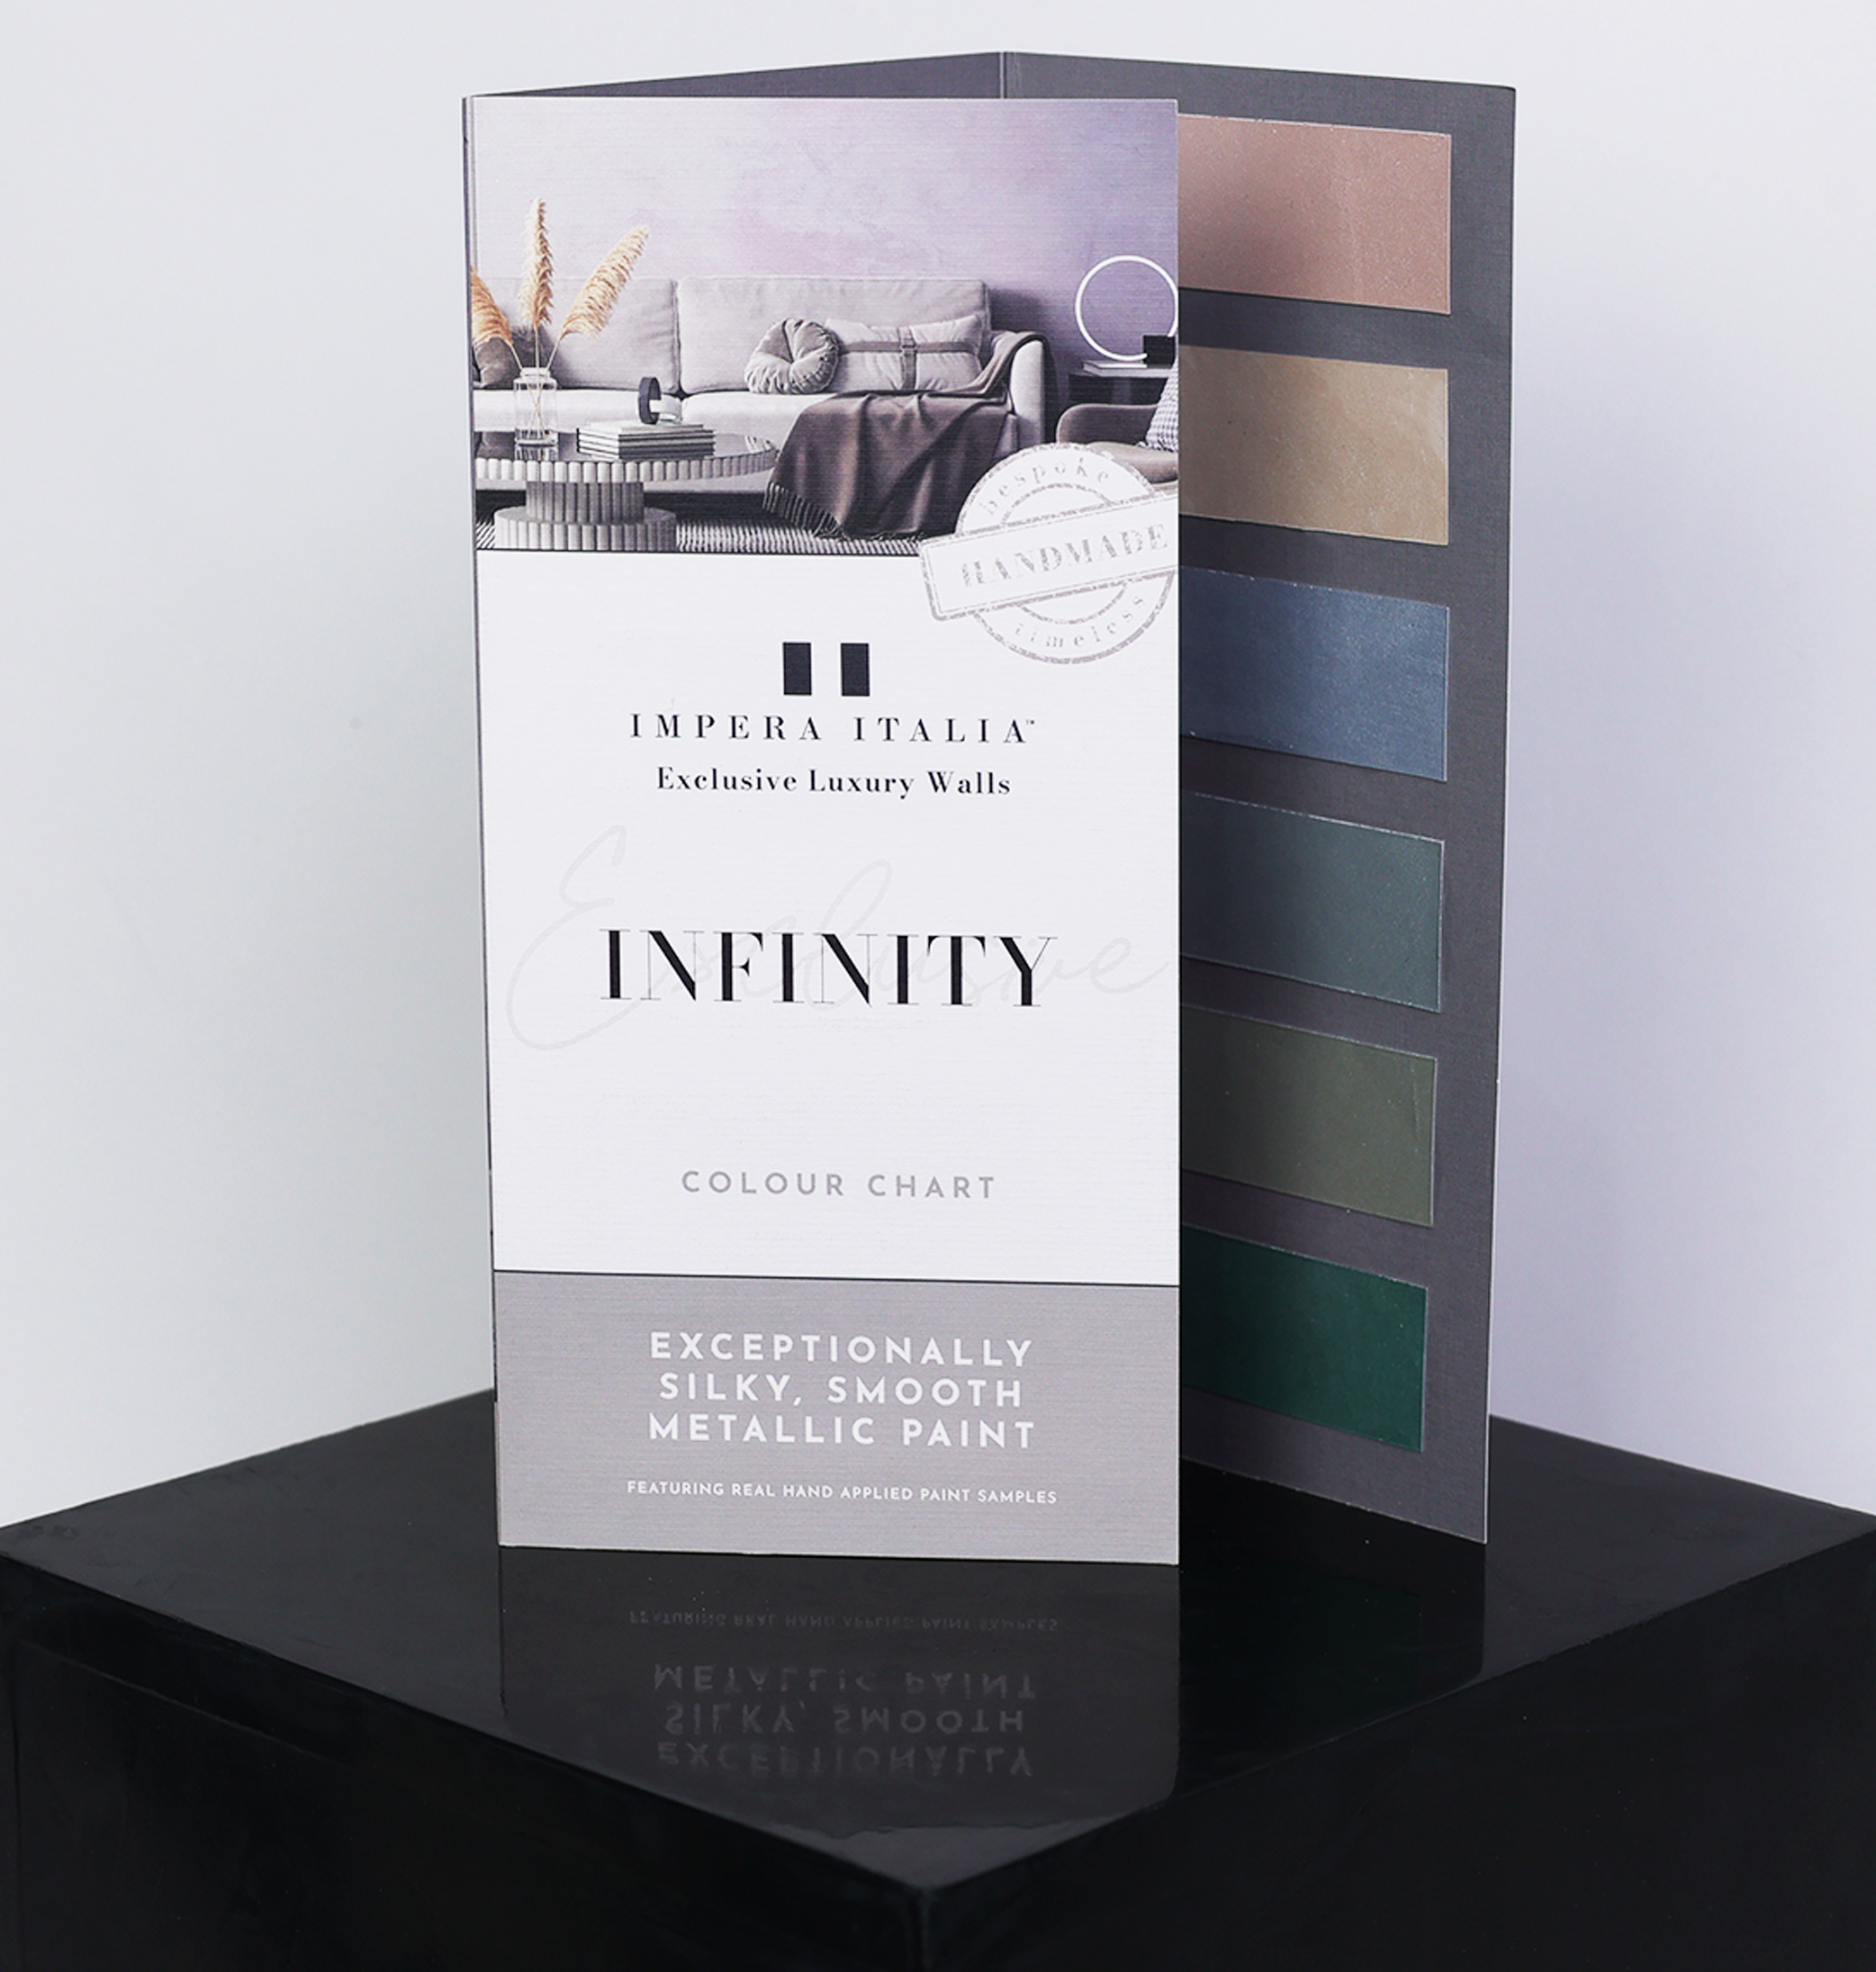 Infinity Colour Chart - Silky Smooth Metallic Paint Colour Chart